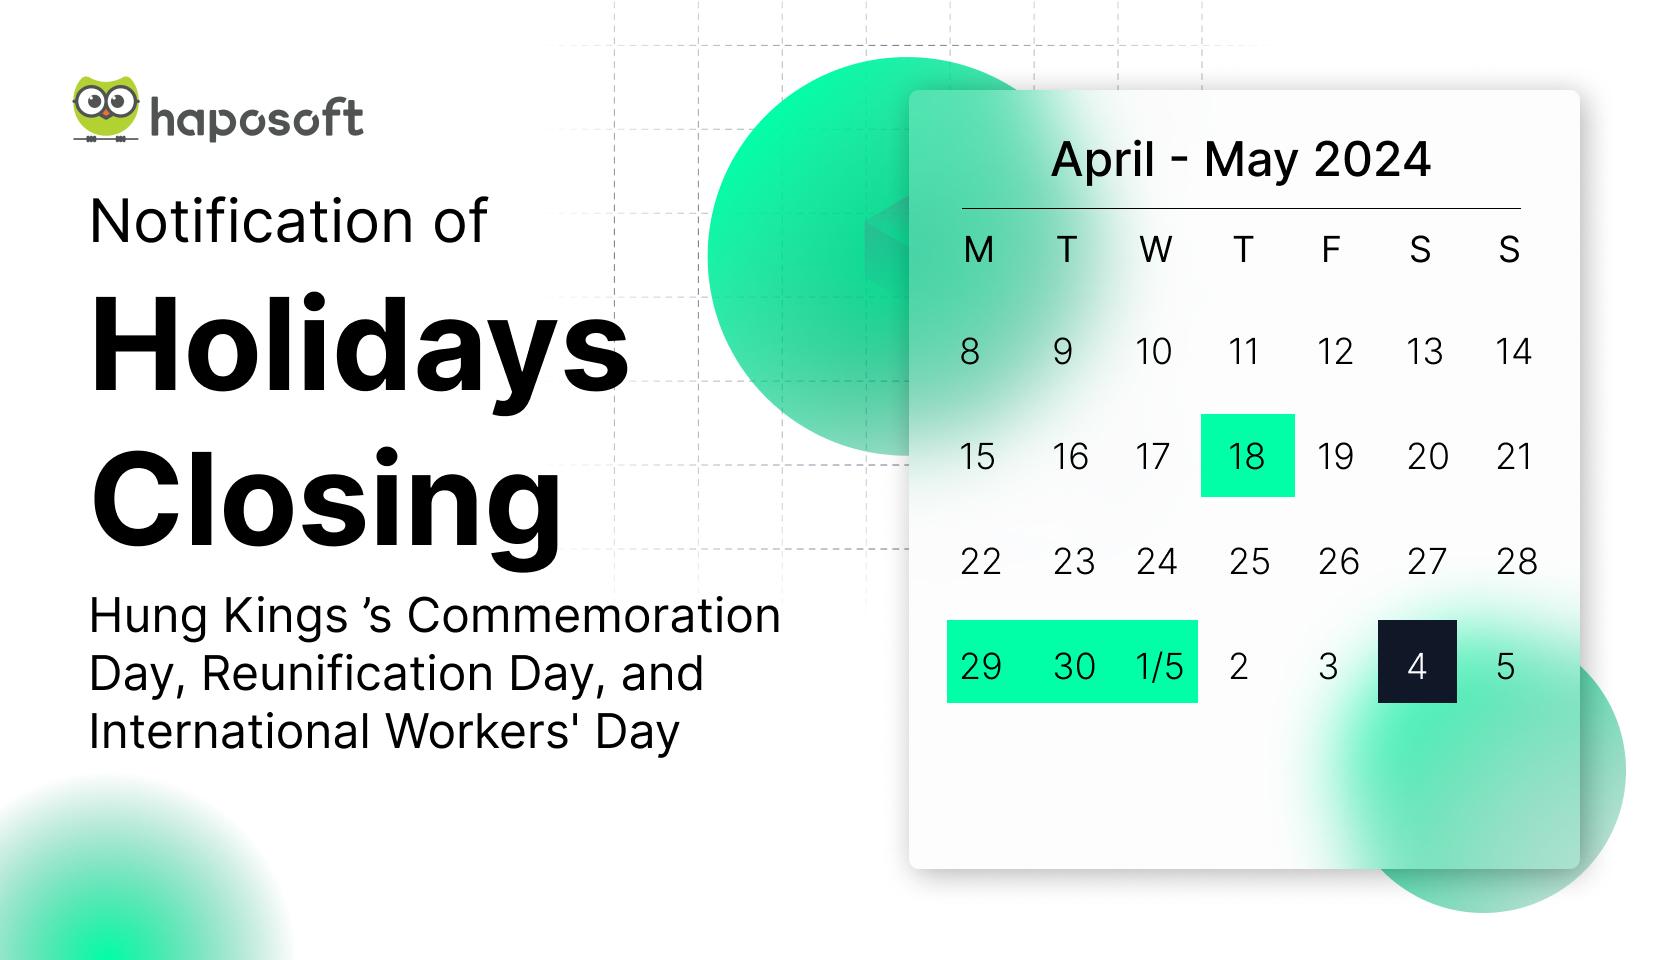 Holidays Closing Announcement - Hung Kings ’s Commemoration Day, Reunification Day, and International Workers' Day